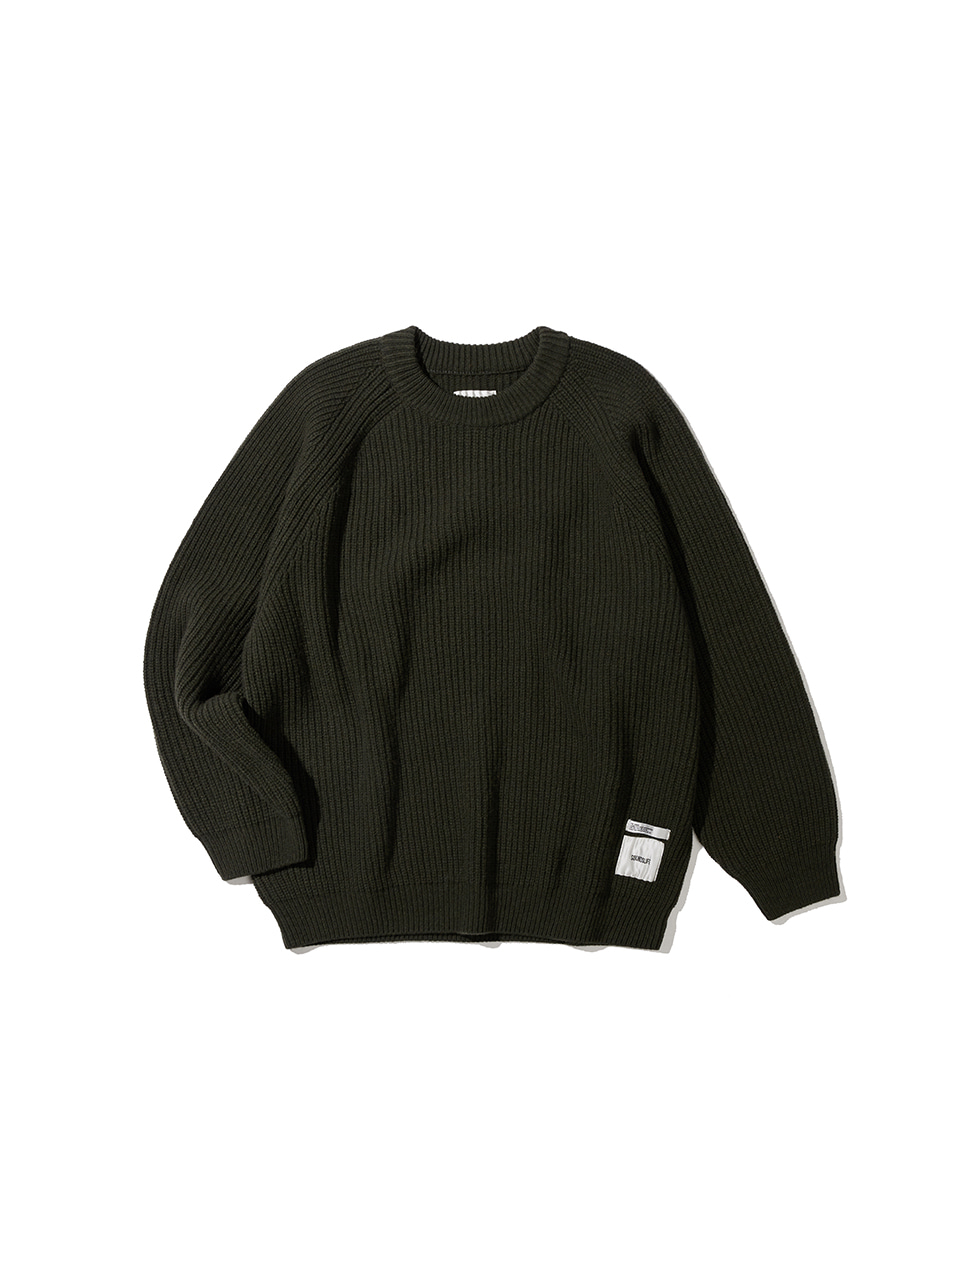 SOUNDSLIFE - Lambs Wool Oversized Crew neck knit Olive